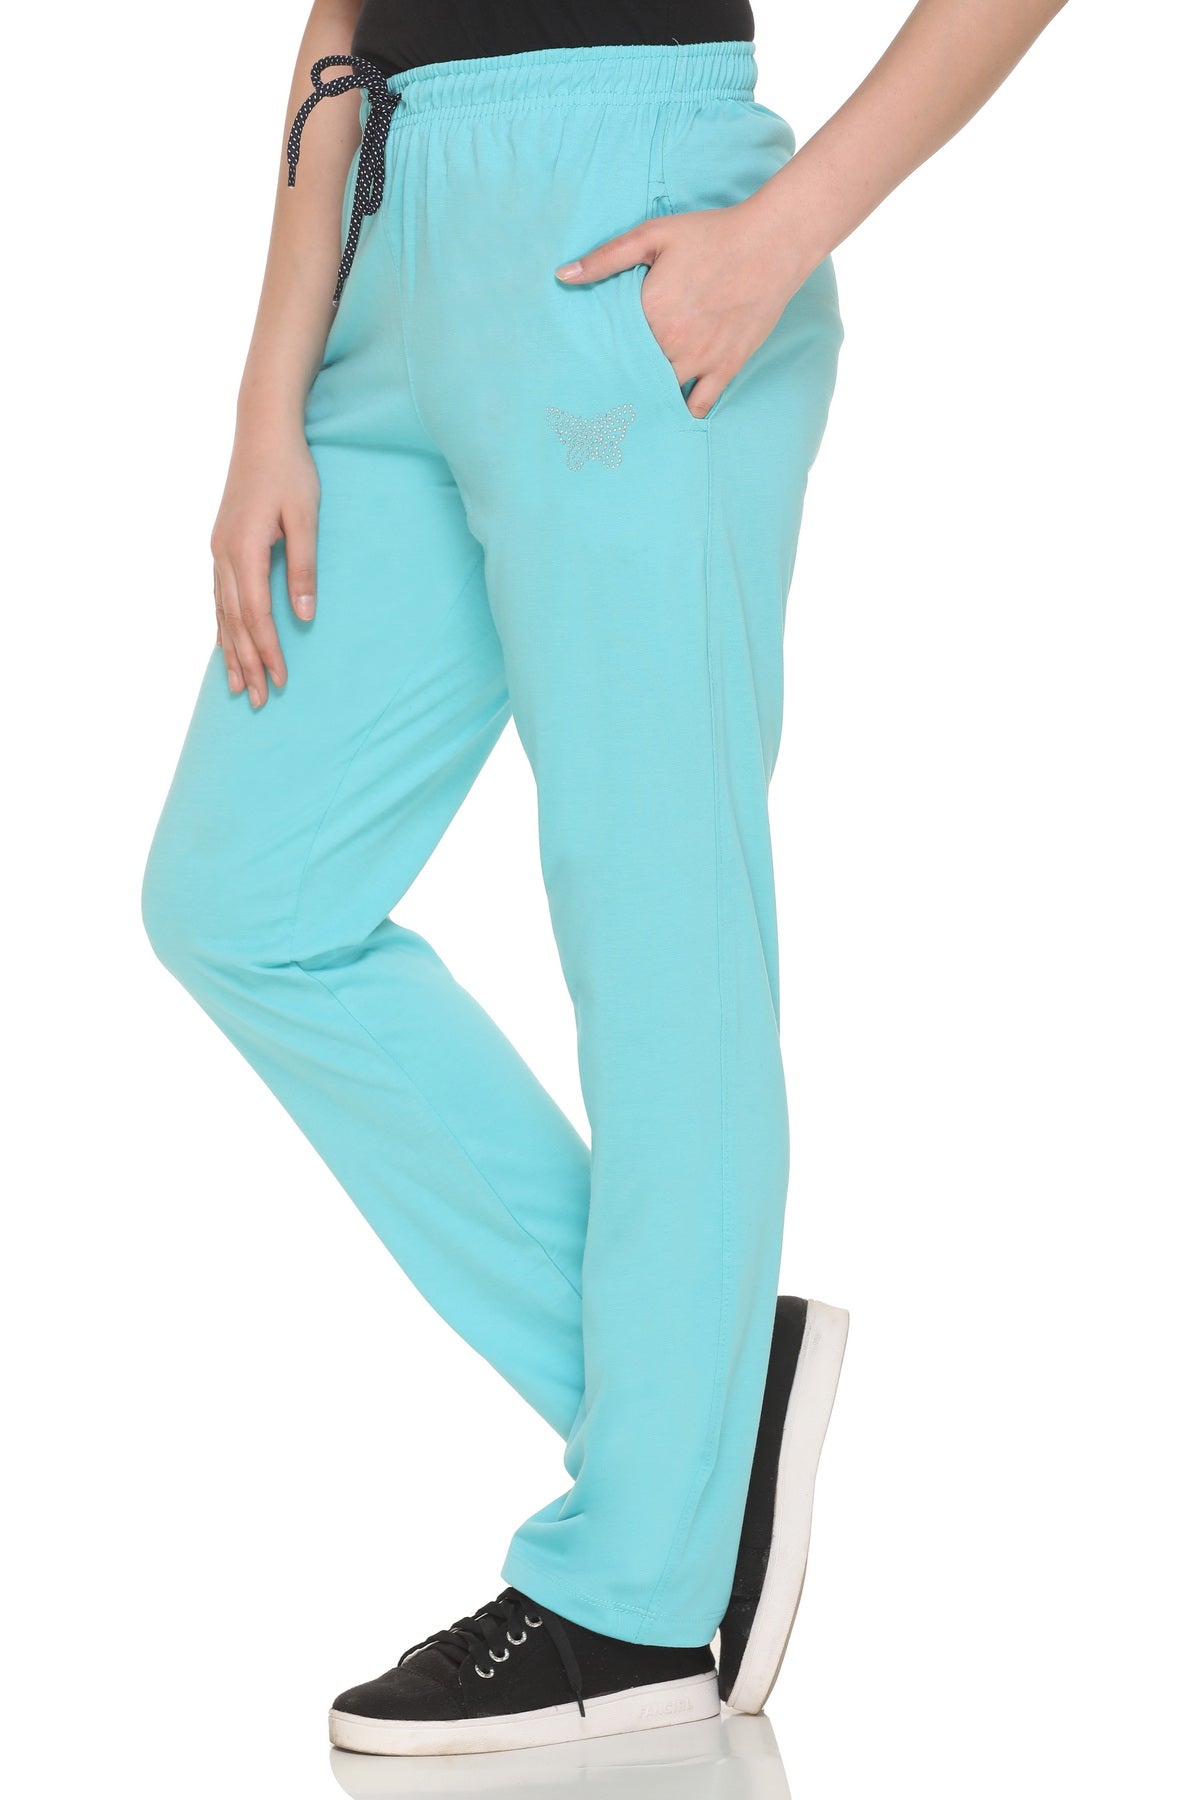 Cupid Women Cotton Regular Fit Trackpants & Lowers- Turquoise freeshipping - Cupid Clothings